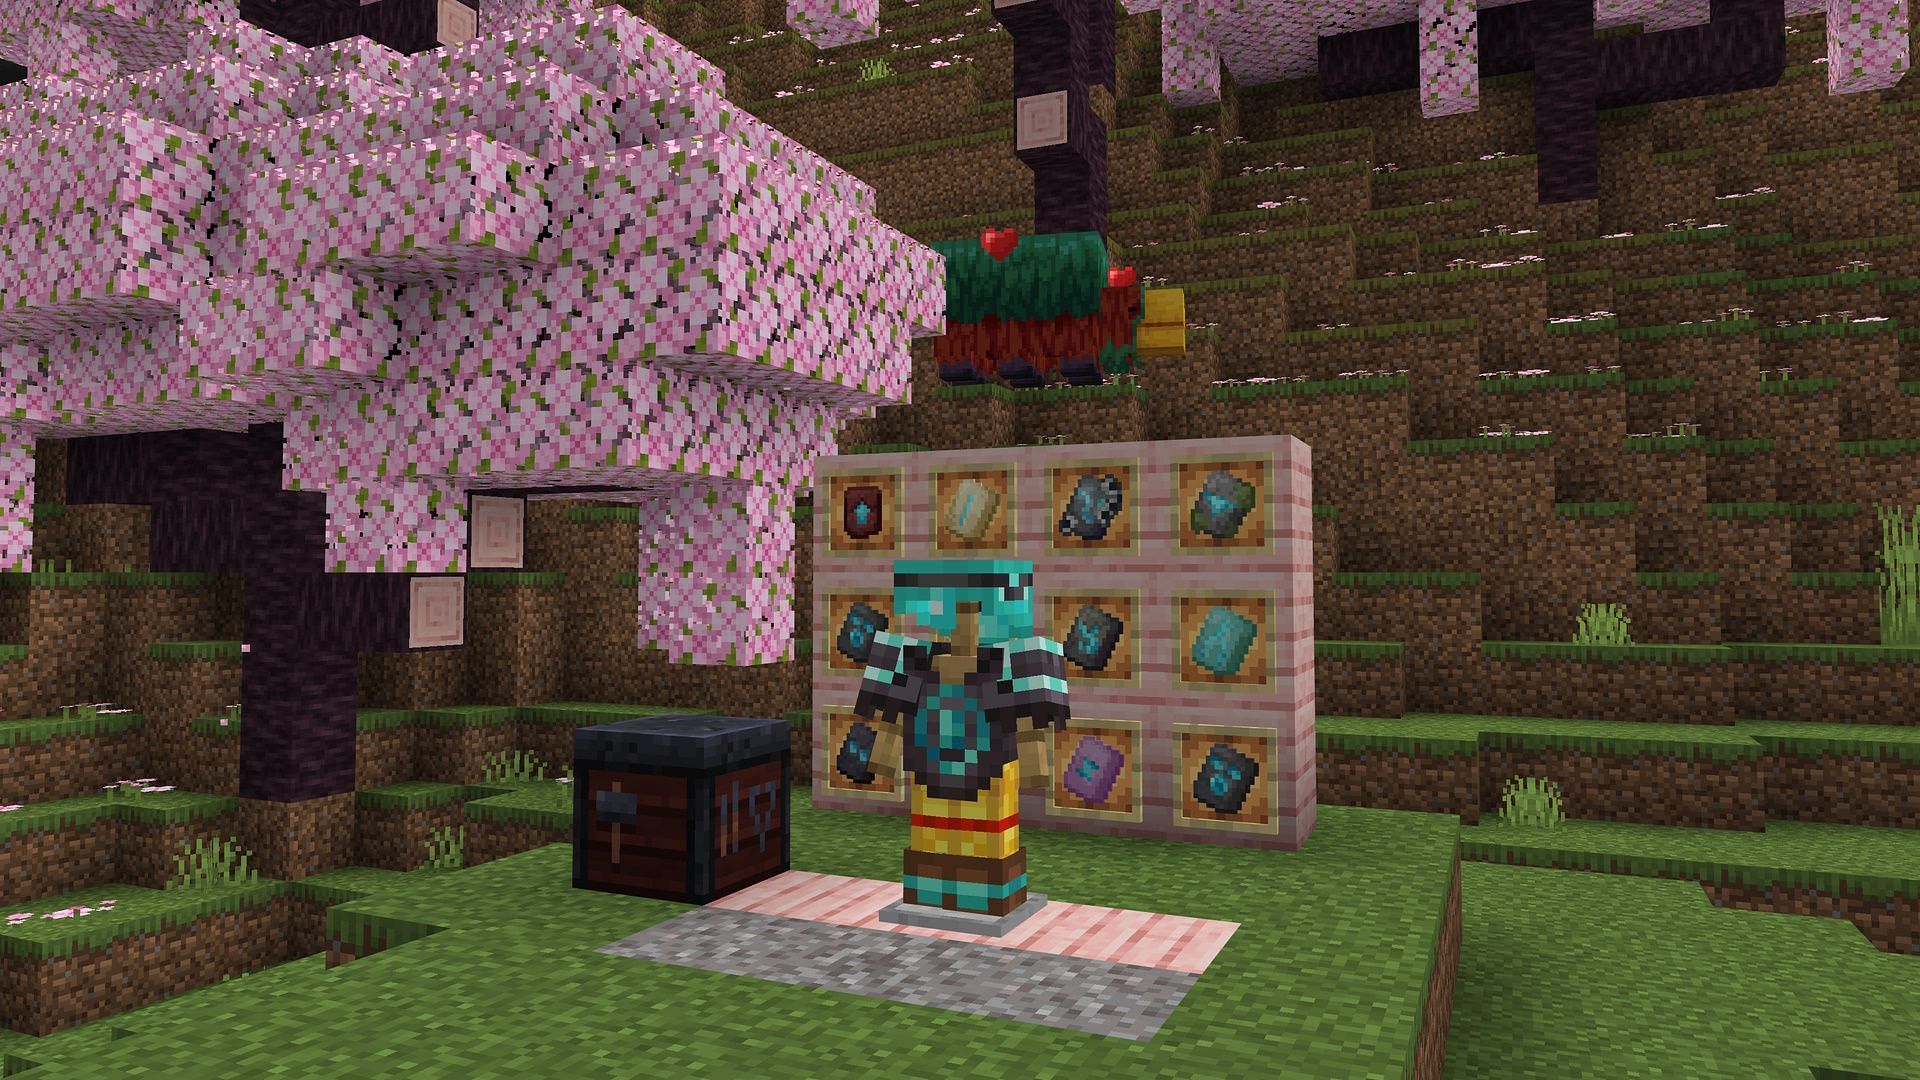 Armor trimming allows players to customize their armor in Minecraft 1.20 (Image via Mojang)